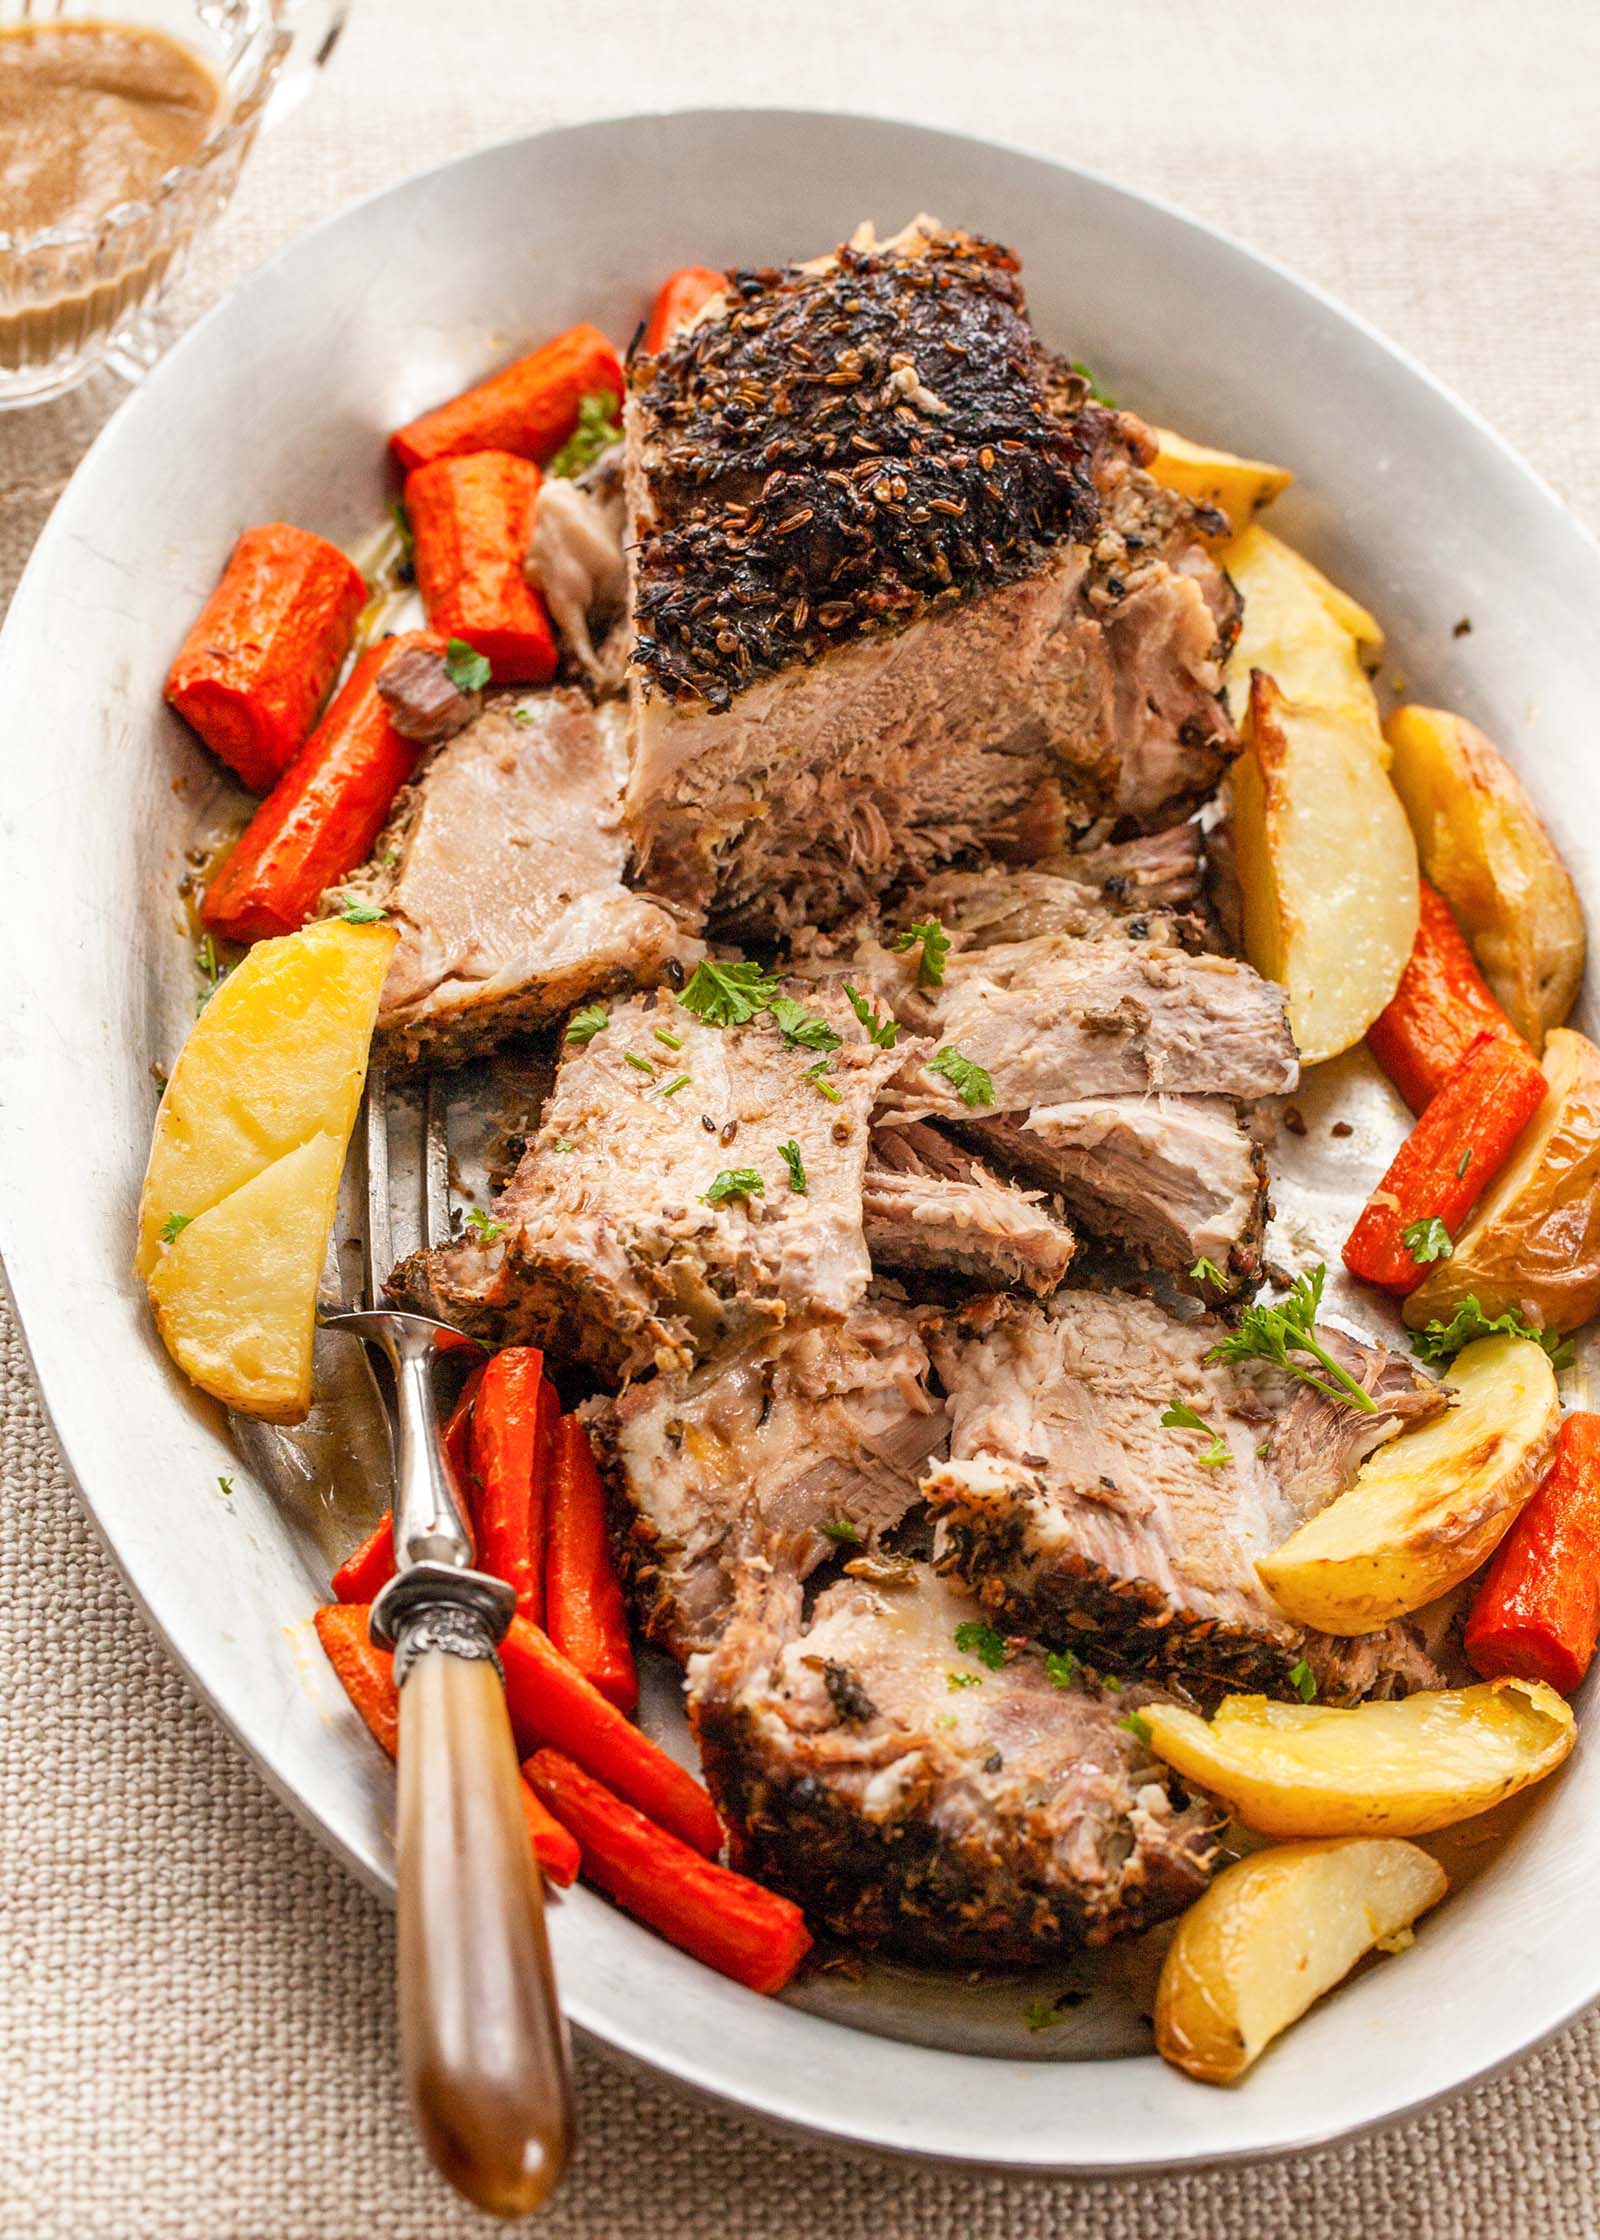 Sliced pork shoulder recipe served with roasted potatoes and carrots.